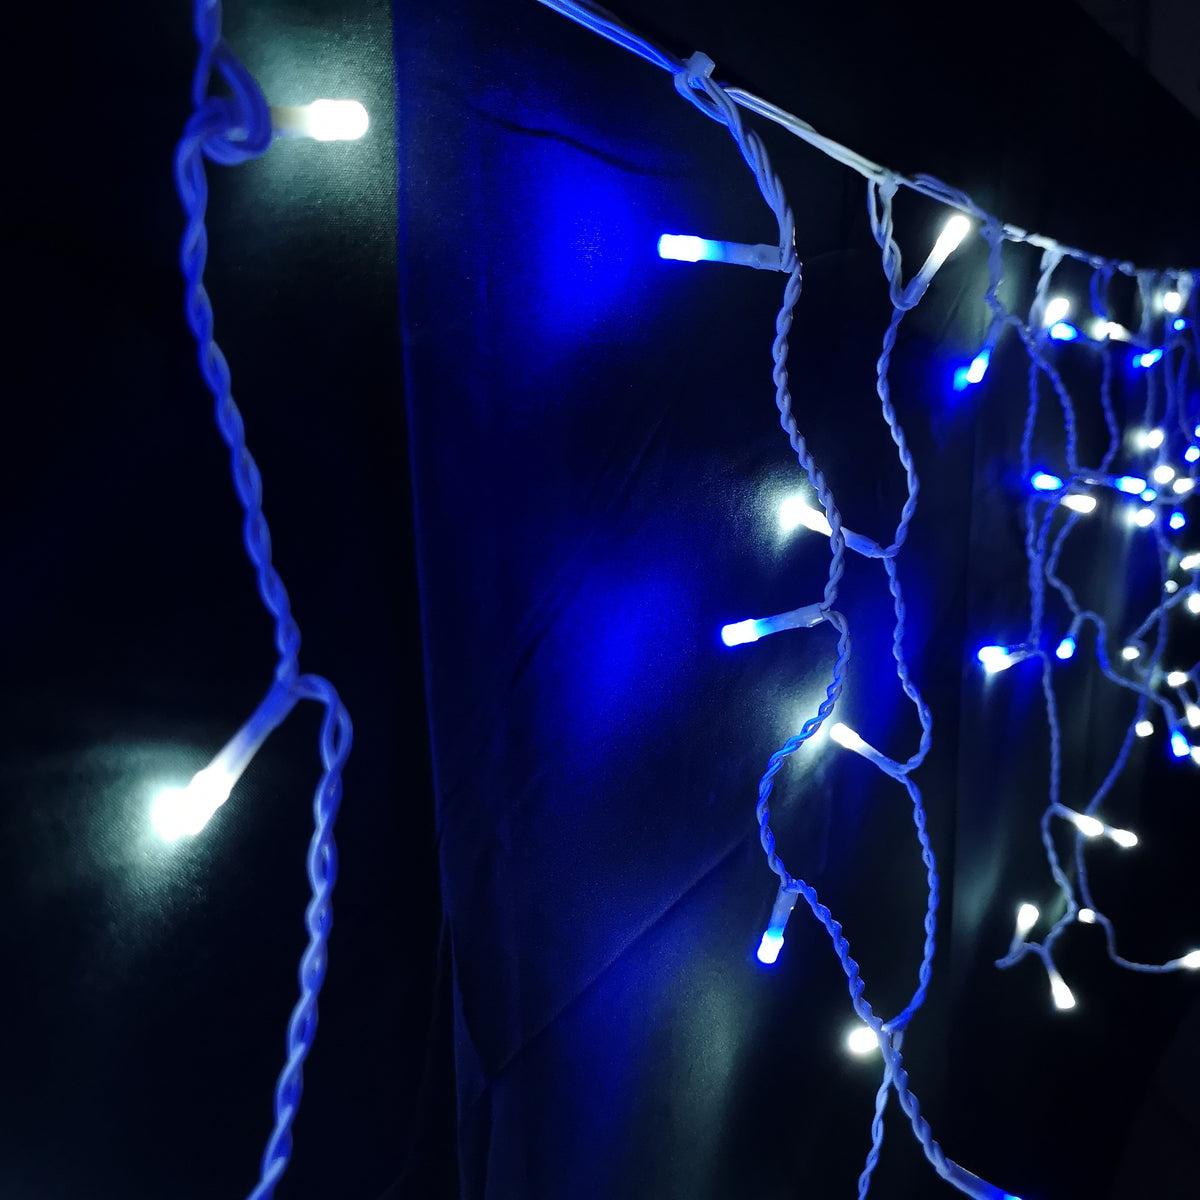 460 LED 11.5m Premier Christmas Outdoor 8 Function Icicle Lights Blue & White